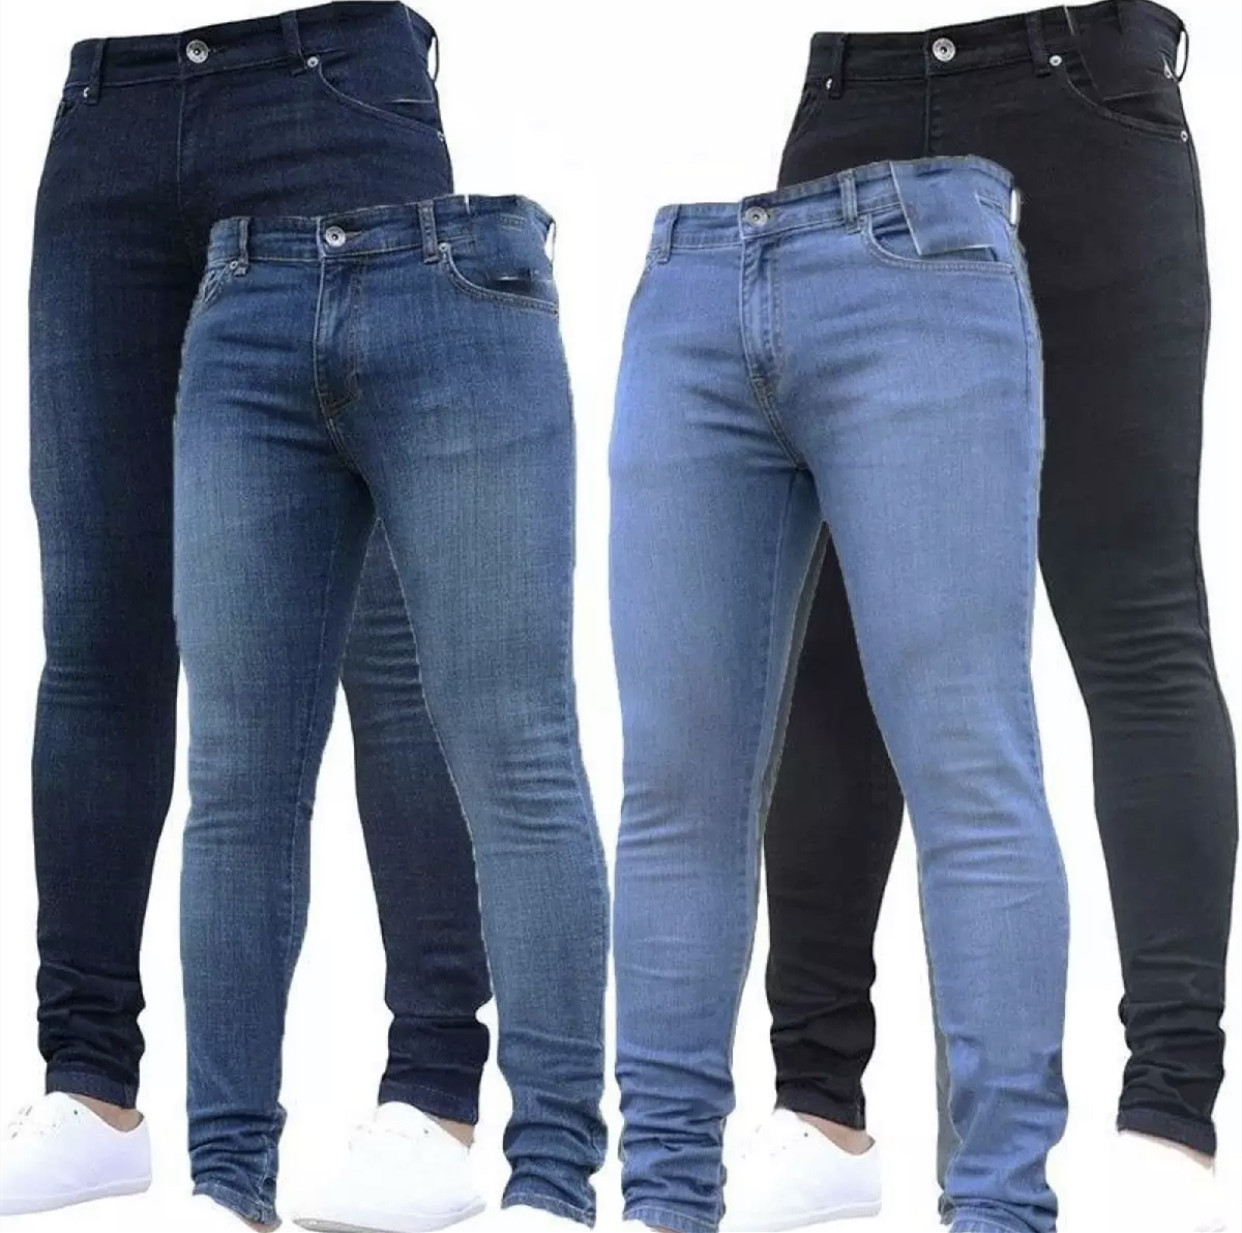 Buy Jeans At Best Price Online Lazada Com Ph - dark blue ripped jeans roblox